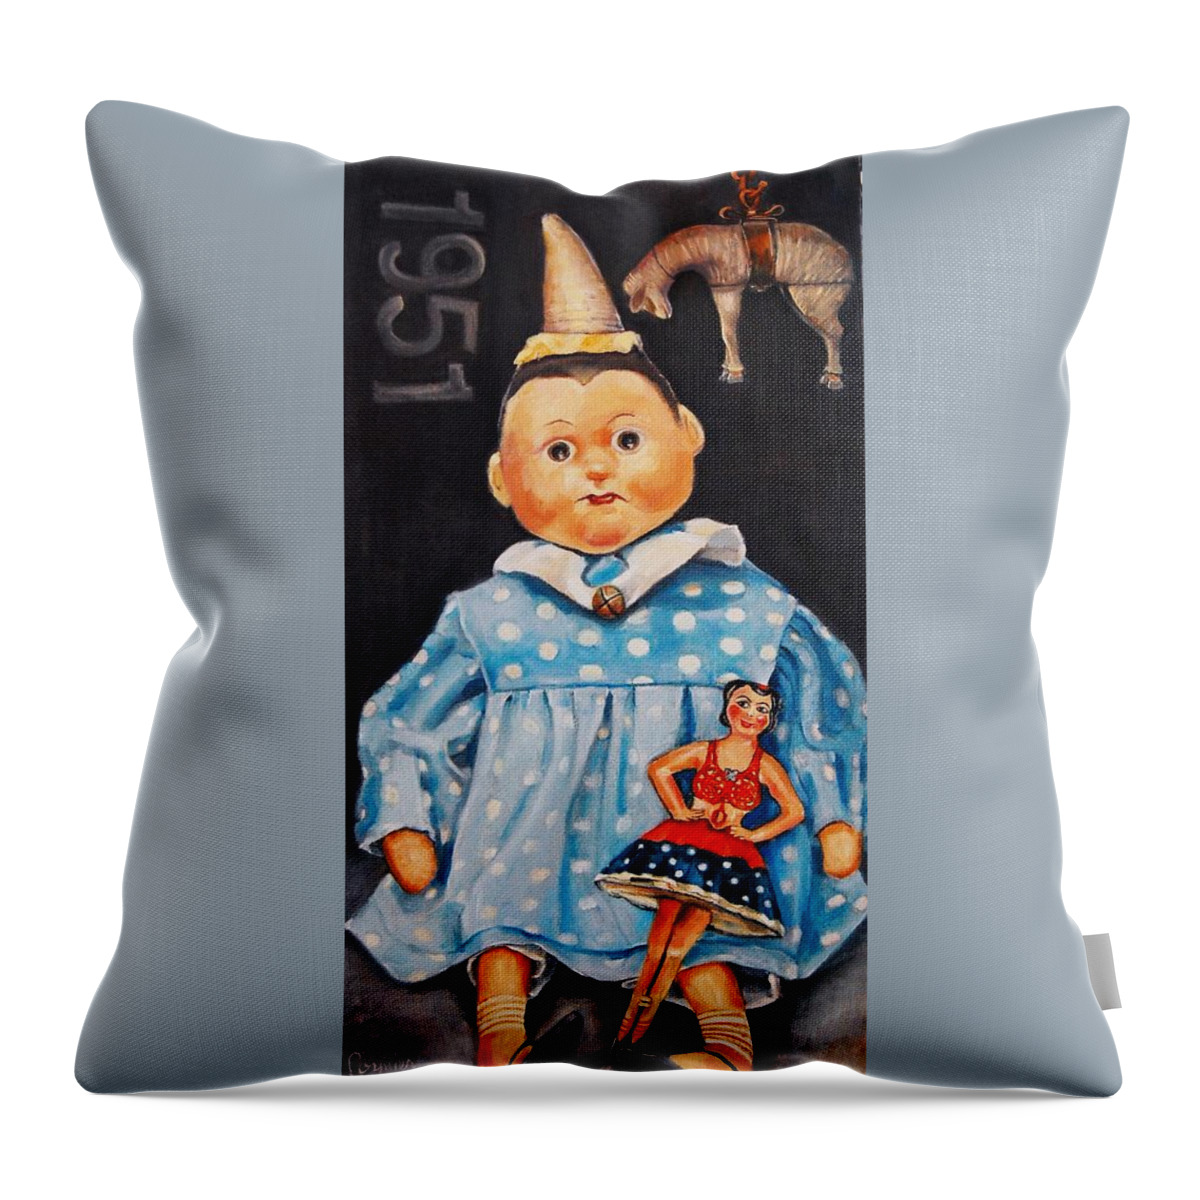 Doll Throw Pillow featuring the painting Tiny Dancer by Jean Cormier